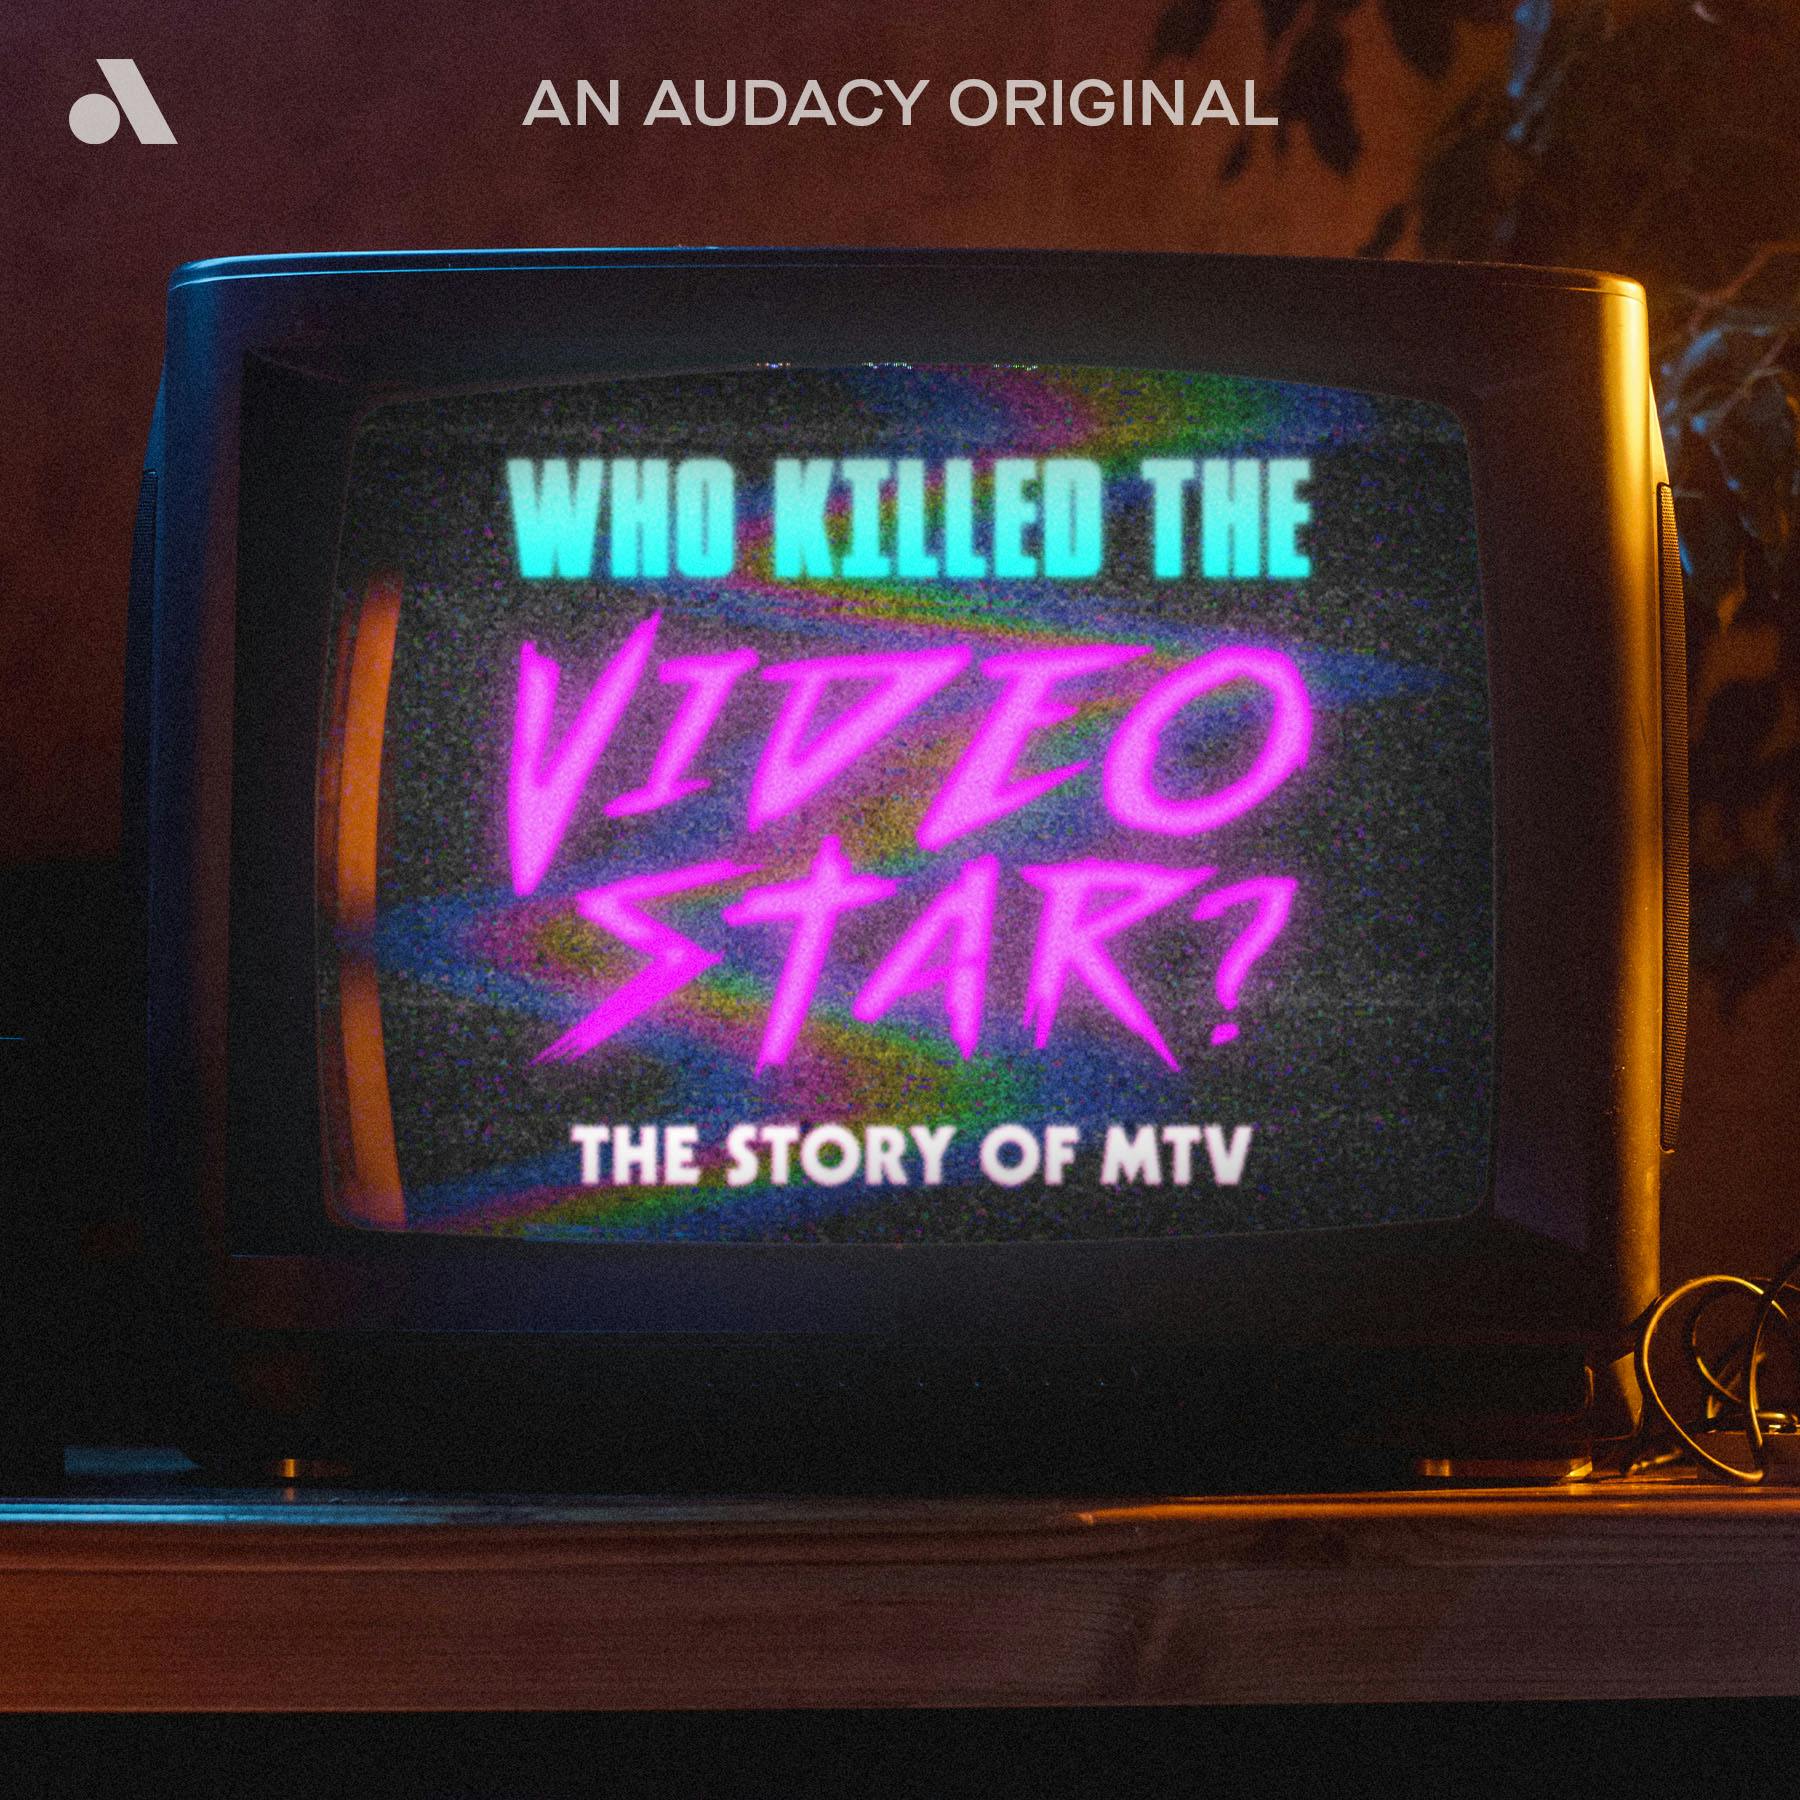 Who Killed the Video Star: The Story of MTV | RIP MTV News by Audacy Studios